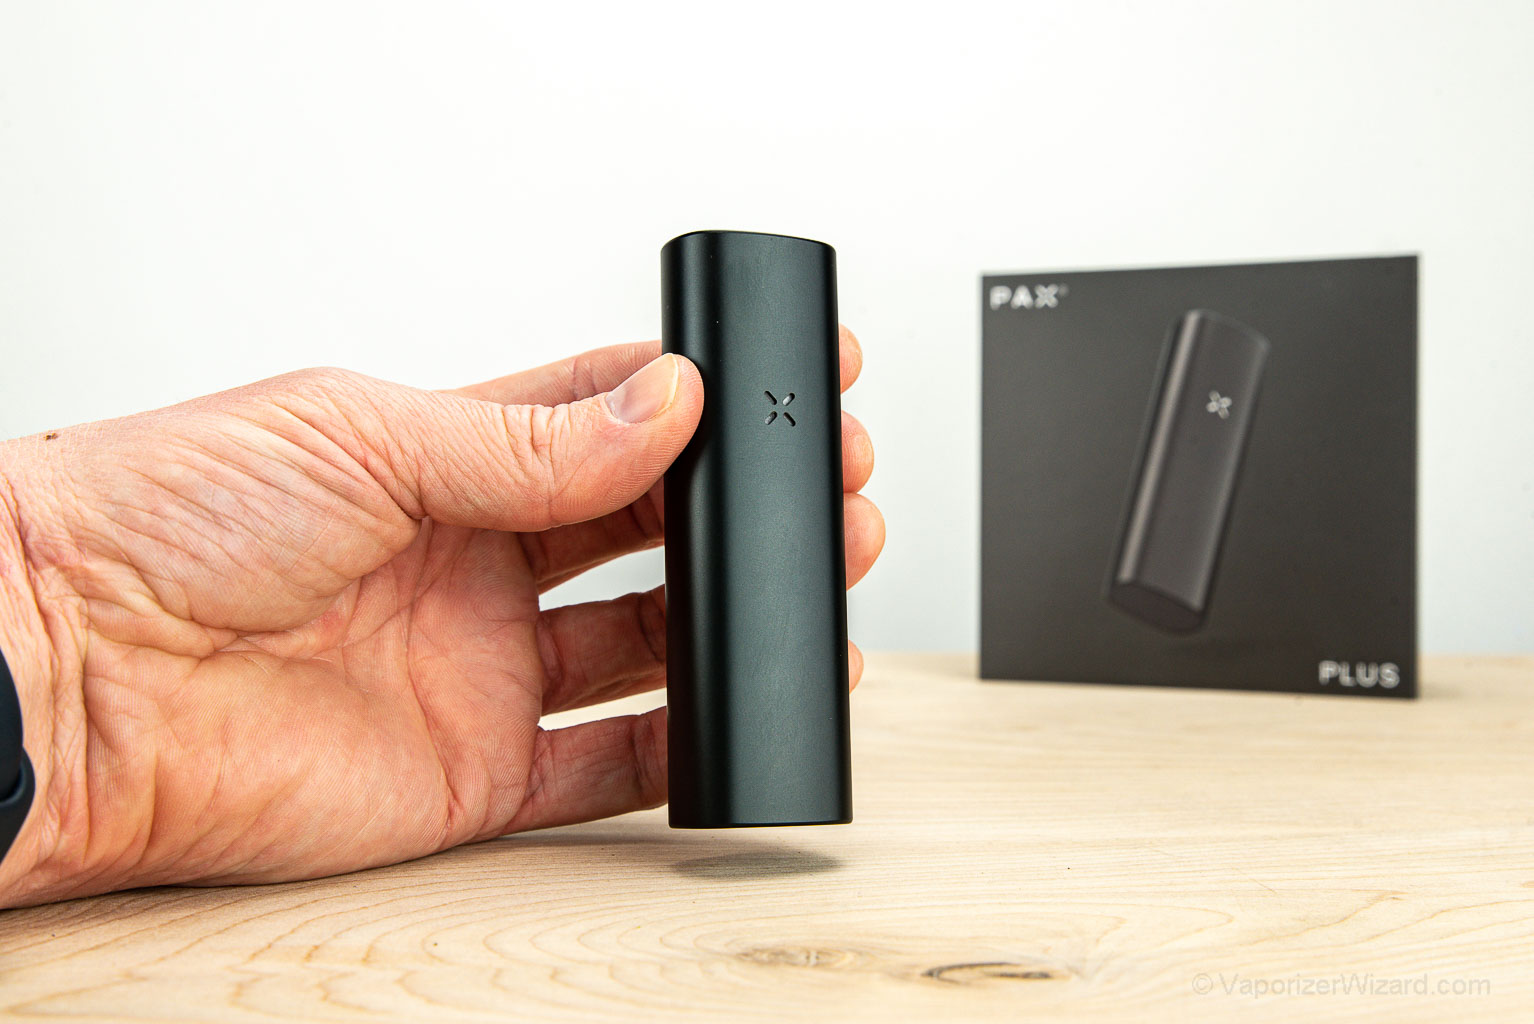 PAX Plus Review: Everything You Need to Know About It